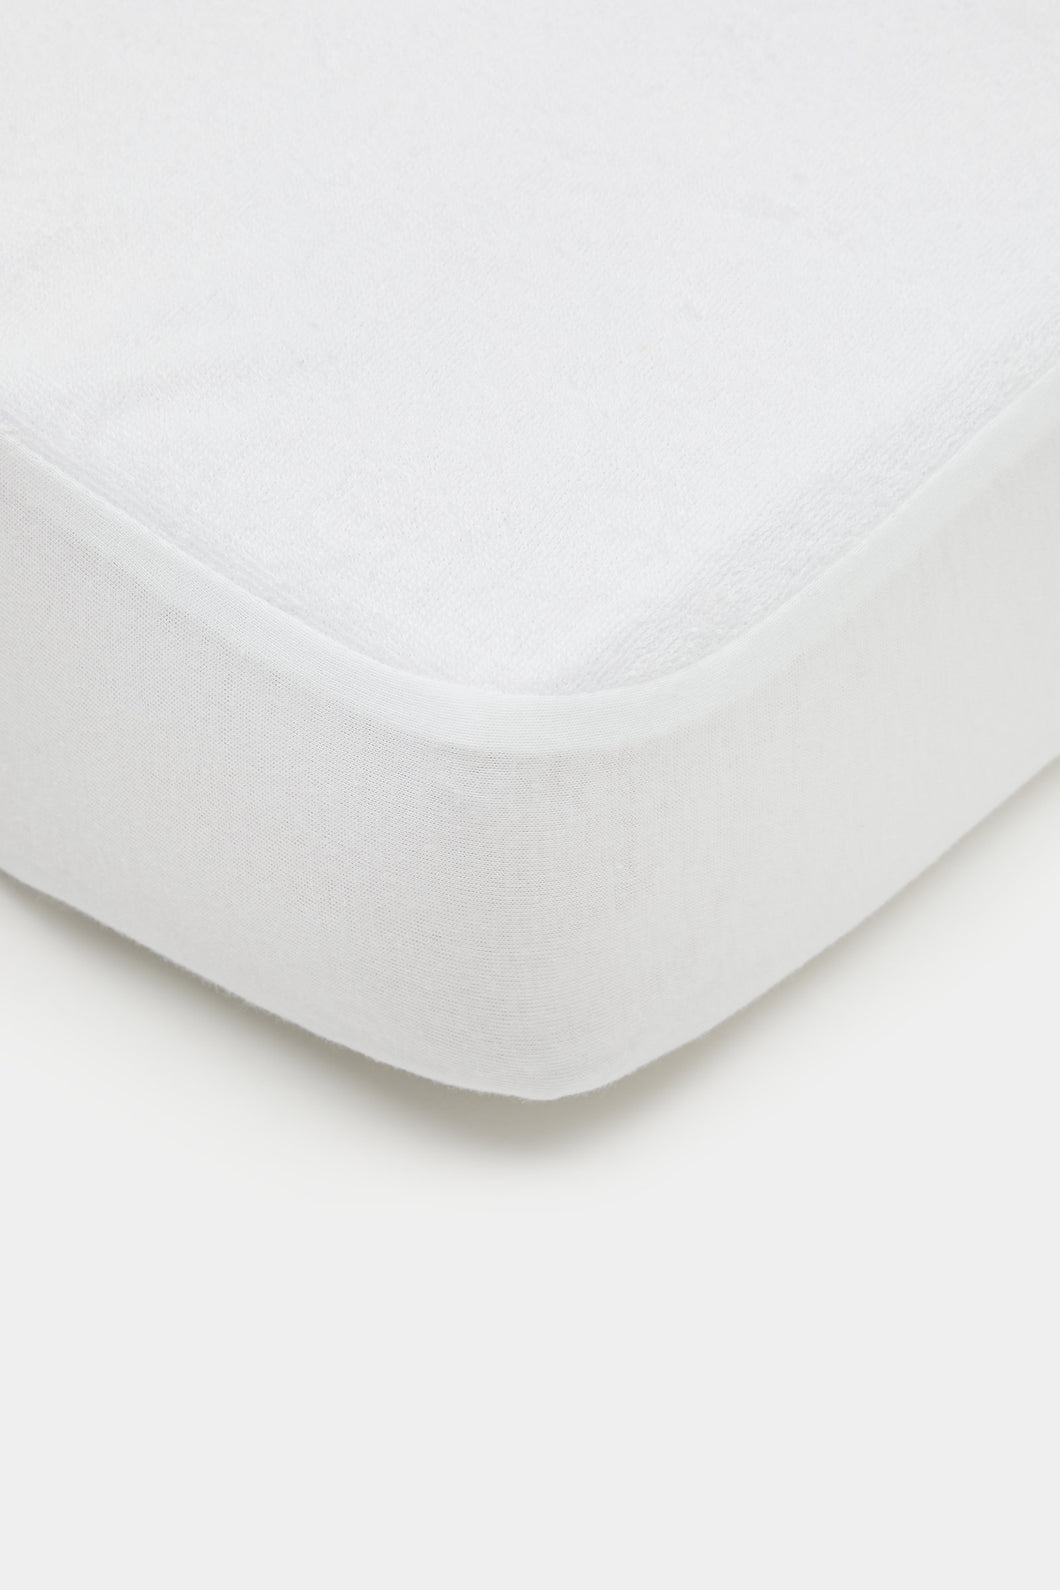 Mothercare Towelling Cot Bed Mattress Protector